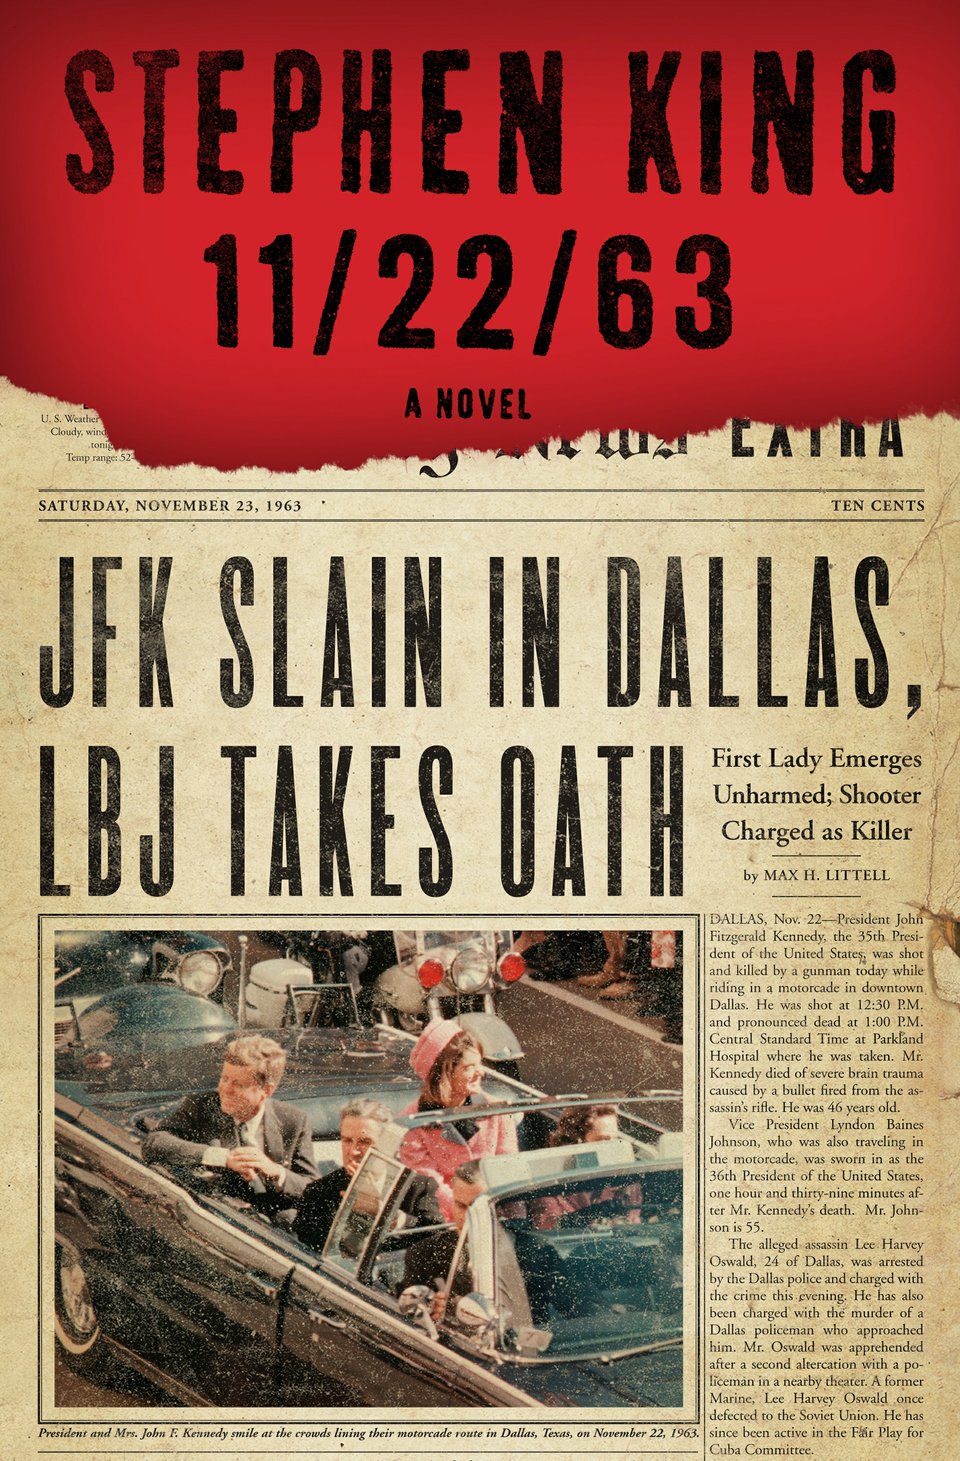 review of the book 11/22/63